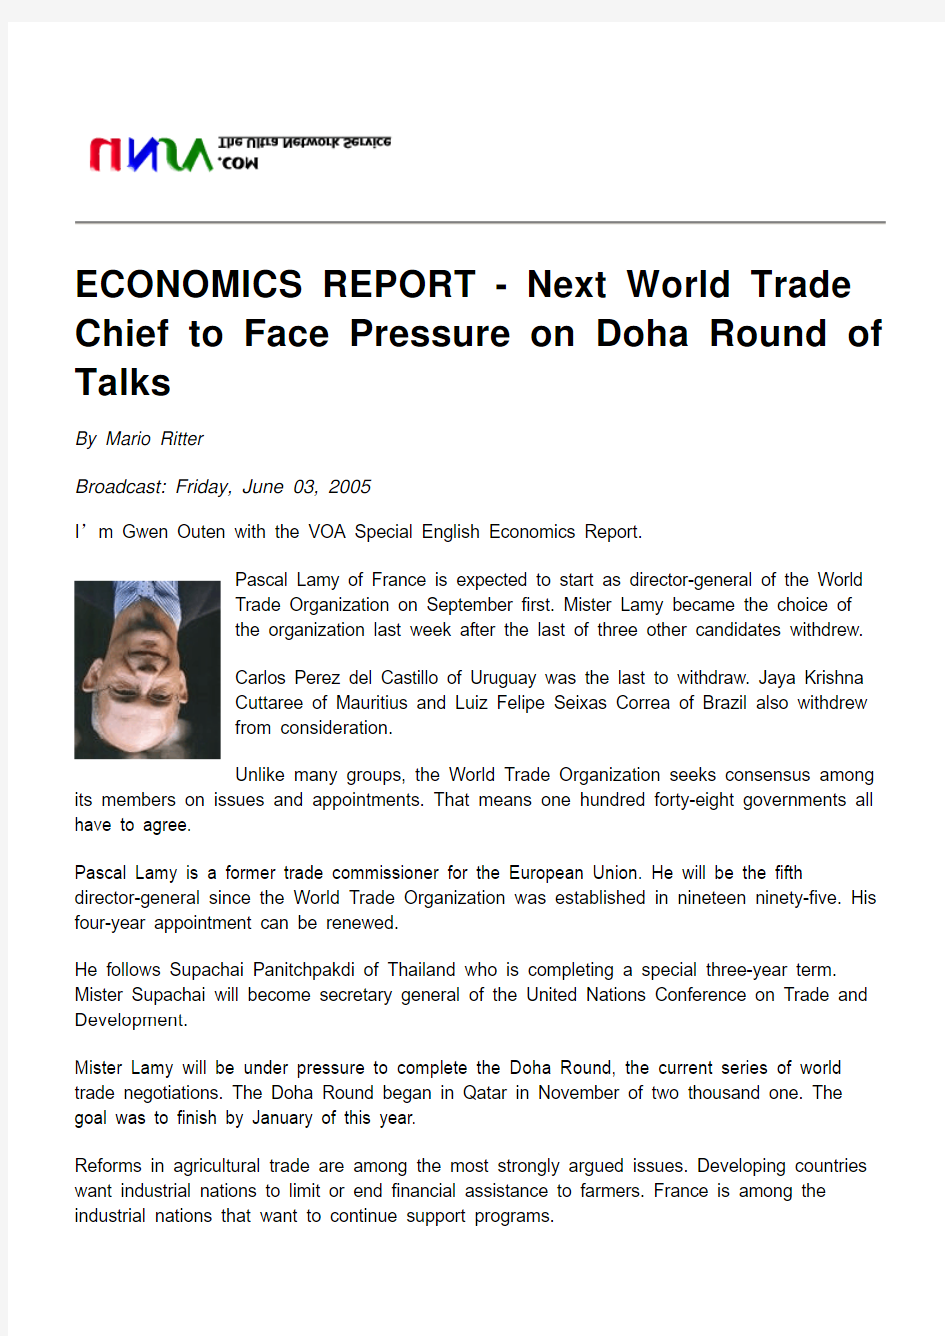 ECONOMICS REPORT - Next World Trade Chief to Face Pressure on Doha Round of Talks